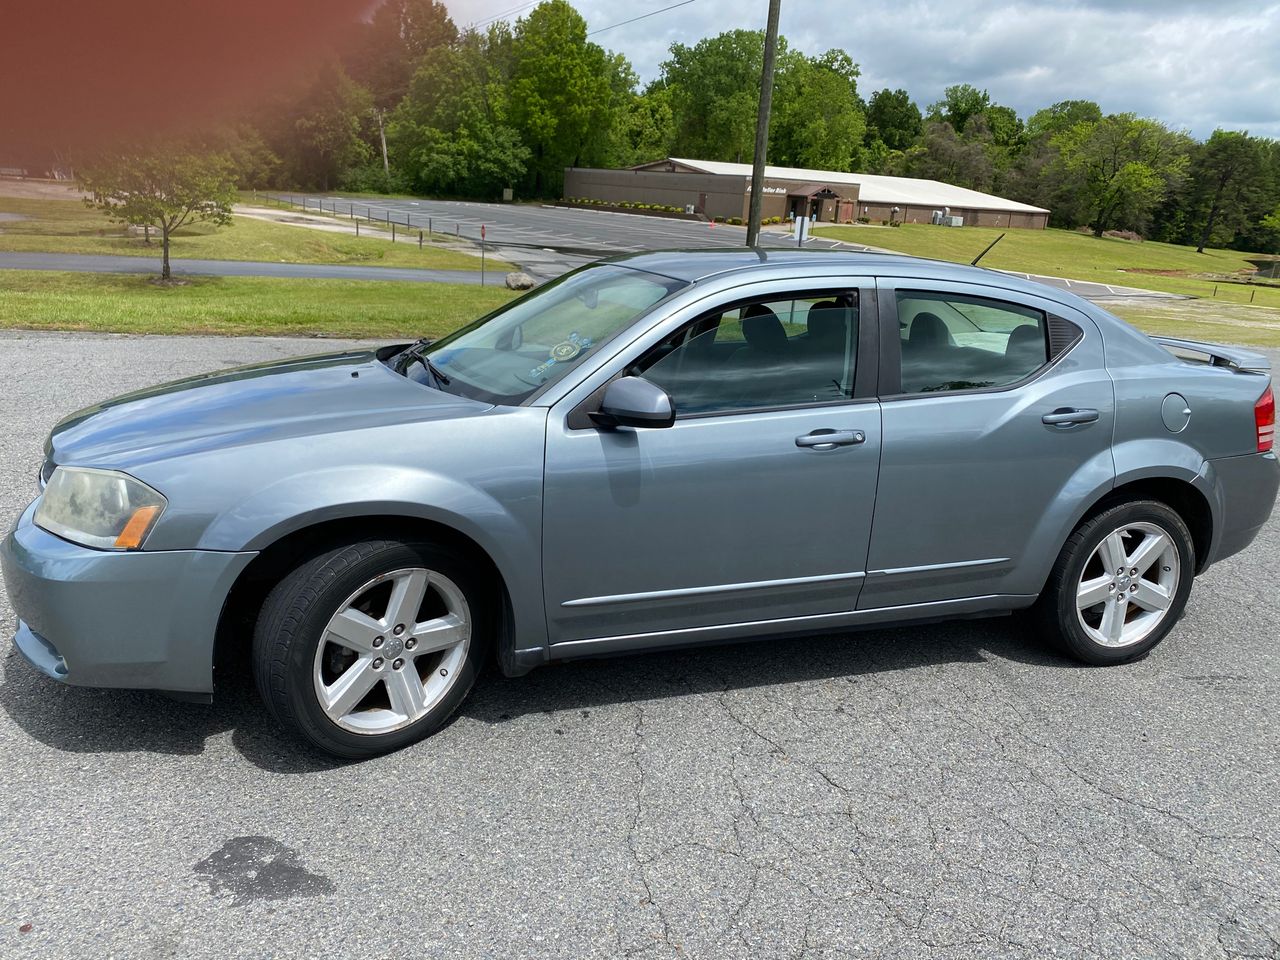 2008 Dodge Avenger R/T | Concord, NC, Bright Silver Metallic Clearcoat (Silver), All Wheel